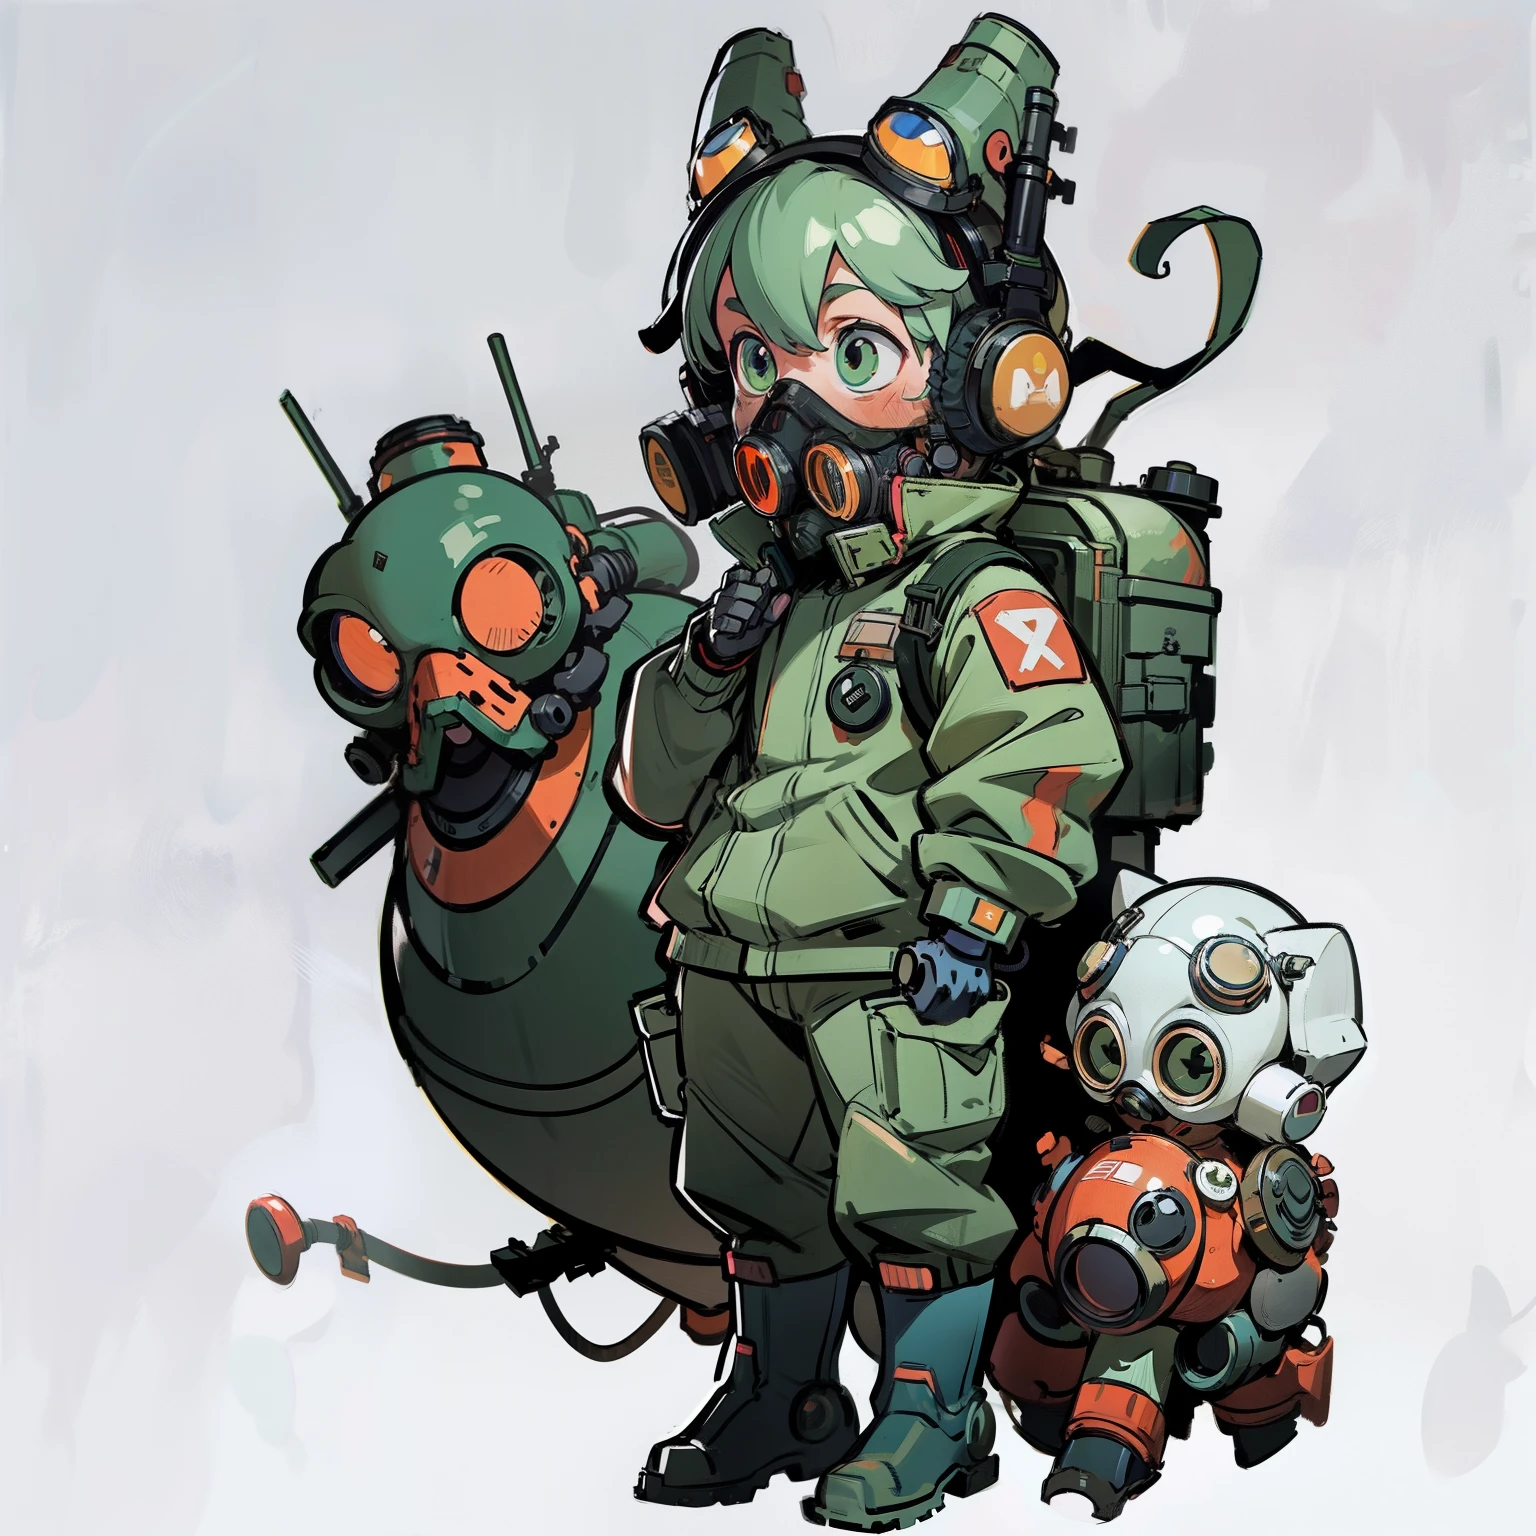 masutepiece, Best Quality, ((Full body shot)), No background, White background, a gas mask, Robot goggles, headphones, mechanical bunny hat, Military, Man's, long boots, camo, Chibi